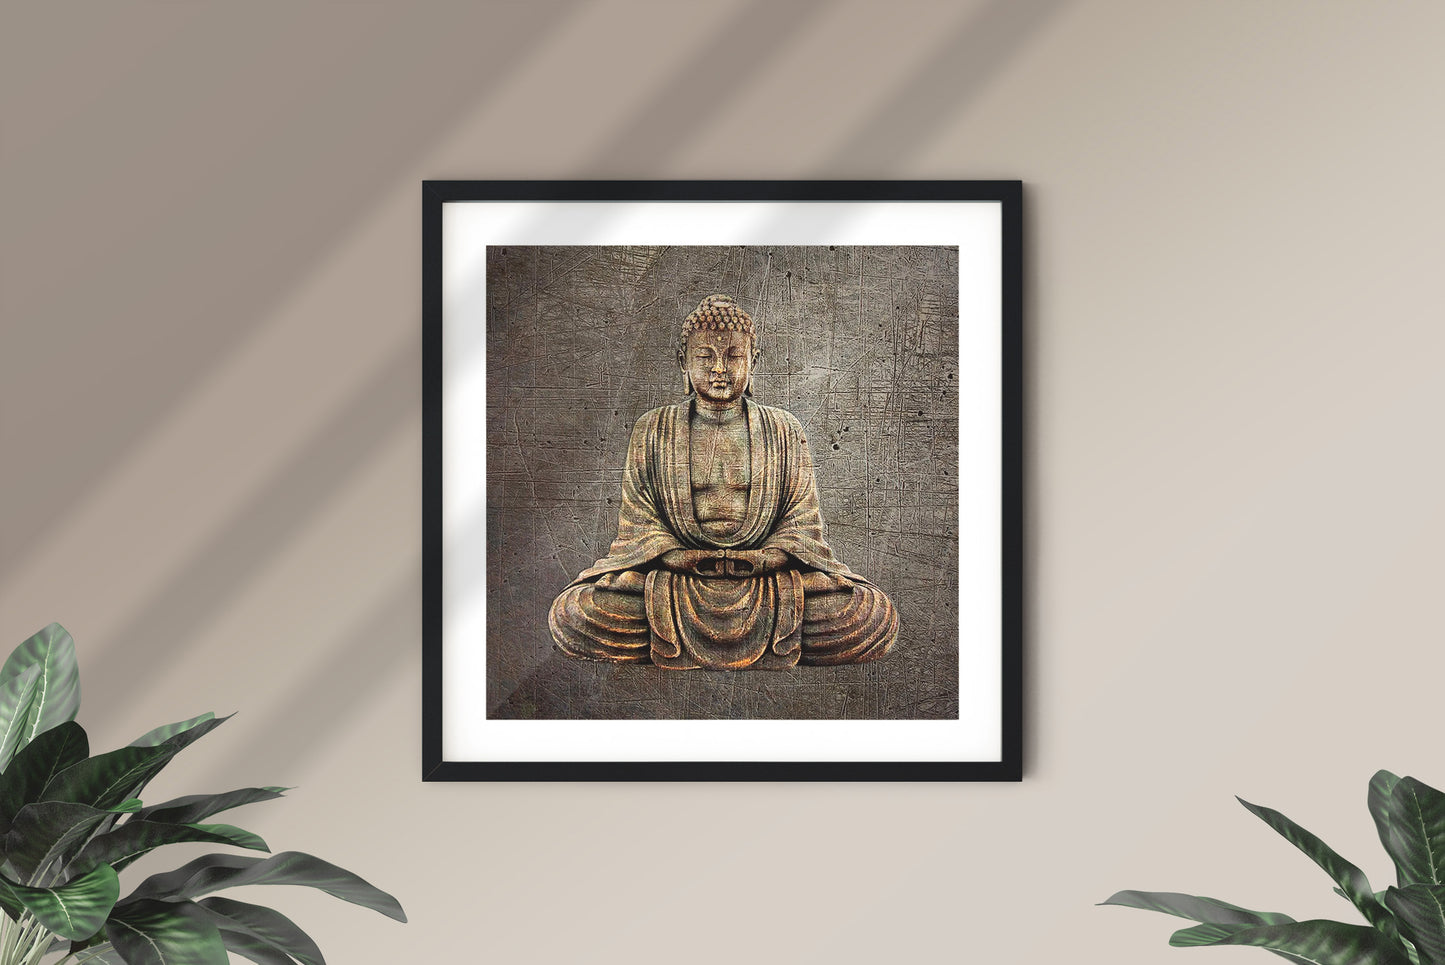 Sitting Buddha on Distressed Stone Background - Museum-quality Art print on Archival Paper framed and hung